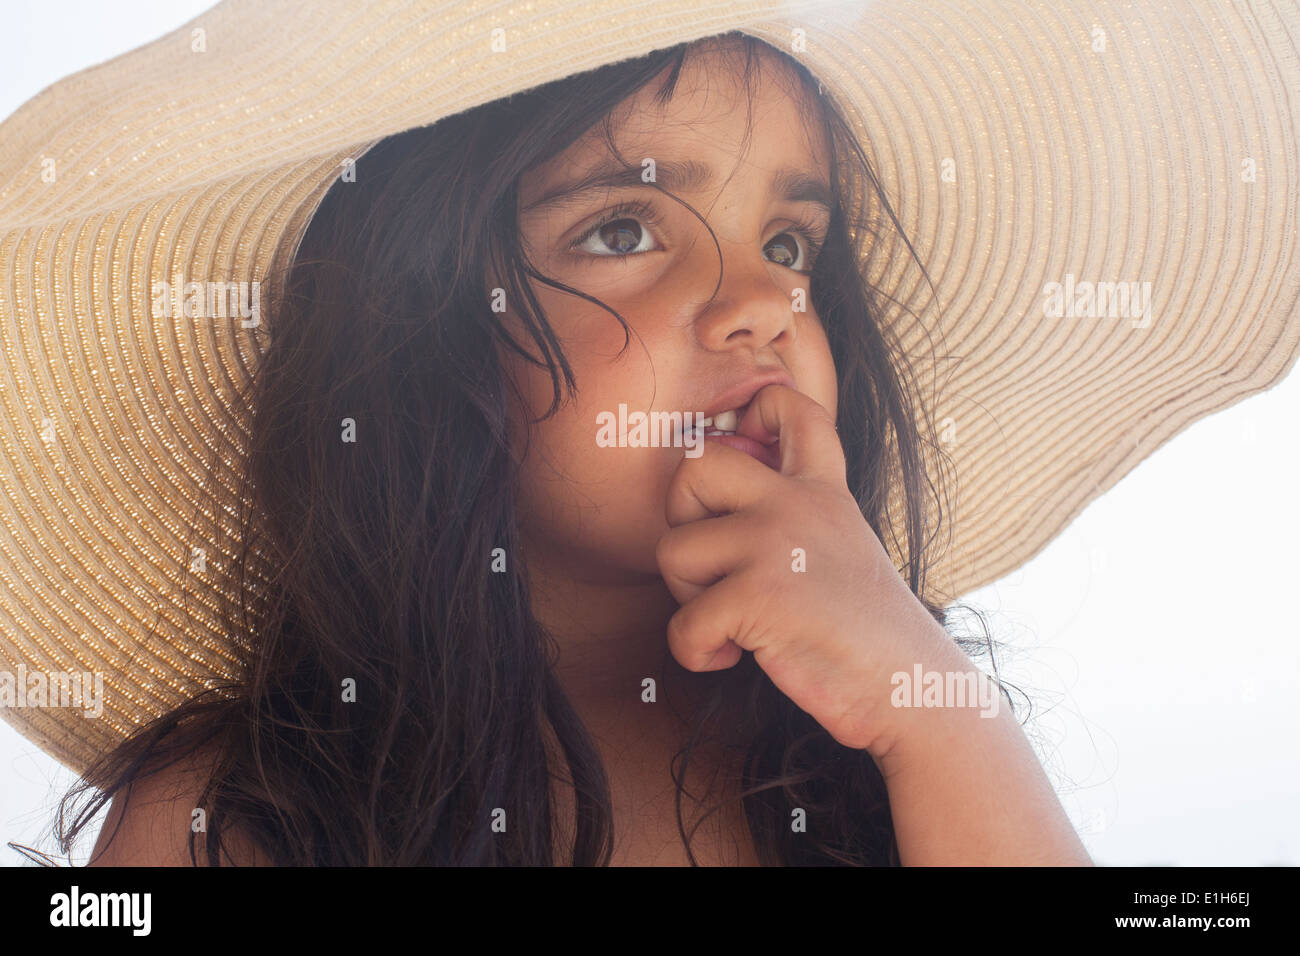 Close up portrait of young girl in sunhat Stock Photo